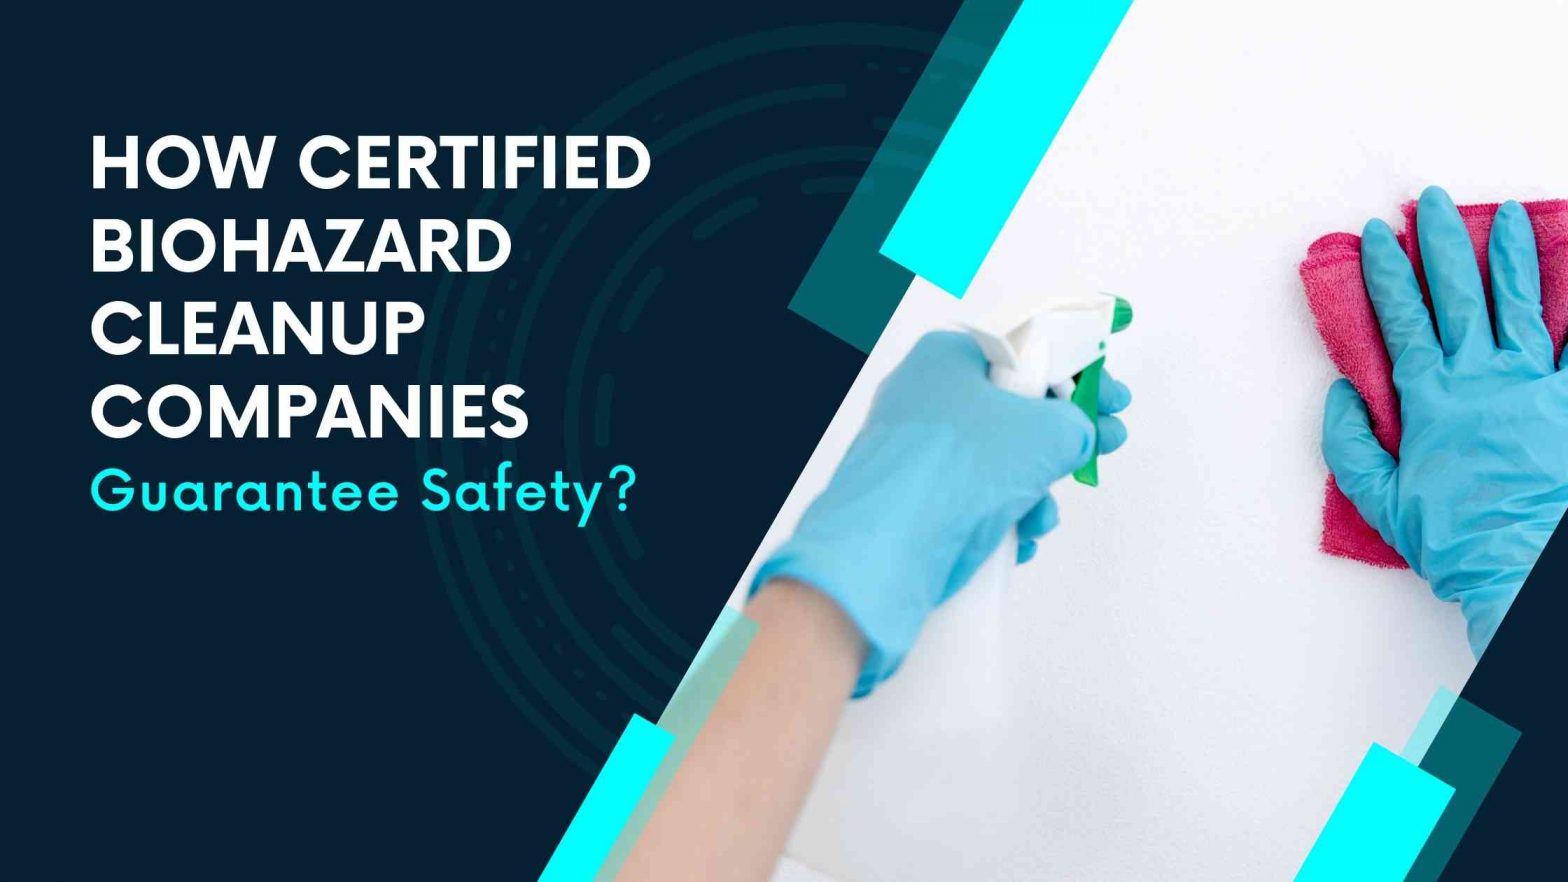 Certified Biohazard Cleanup Companies